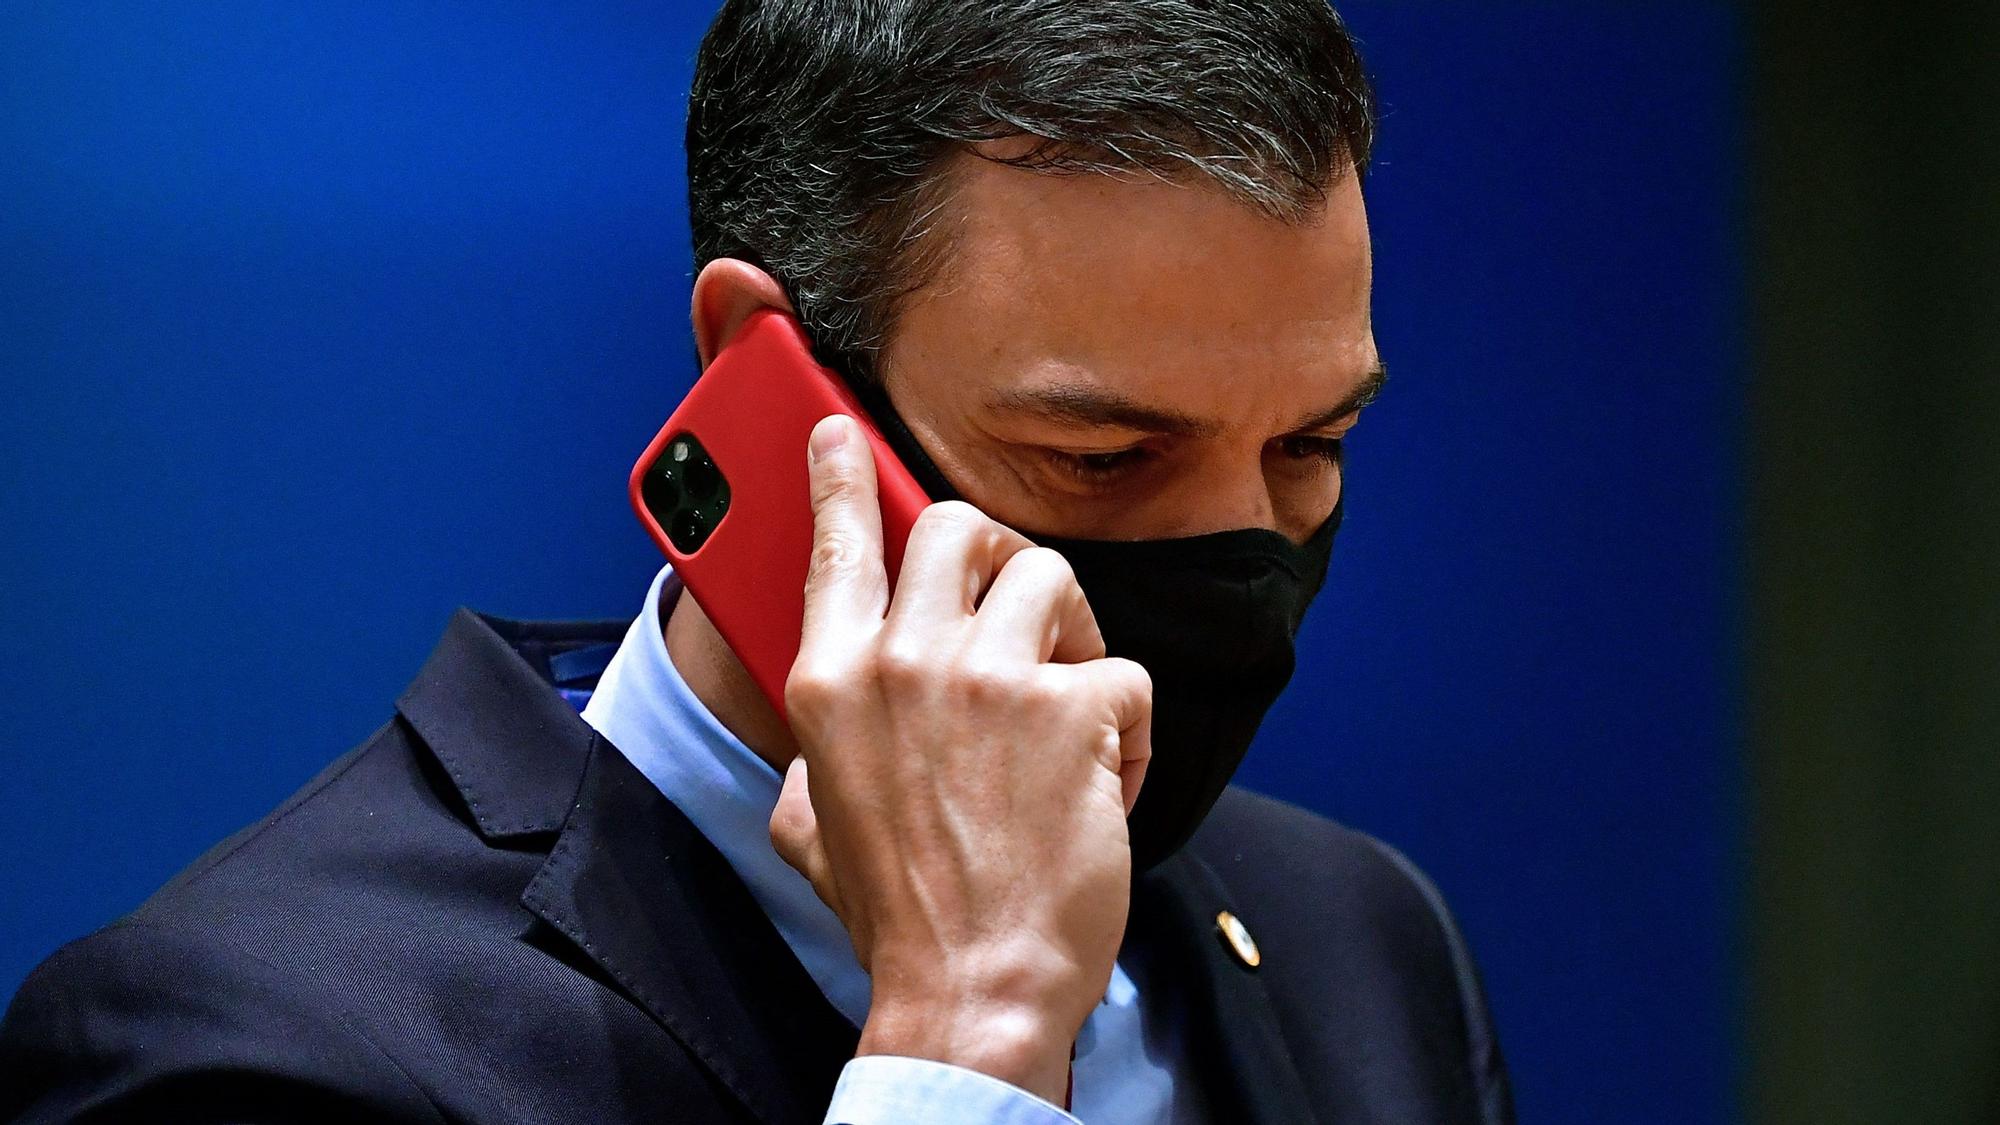 In this file photo taken on July 20, 2020 Spain's Prime Minister Pedro Sanchez phones during an EU summit in Brussels. - Spain said on May 2, 2022 that the mobile phones of Prime Minister Pedro Sanchez and Defence Minister Margarita Robles were tapped using Pegasus spyware in an &quot;illicit and external&quot; intervention. (Photo by JOHN THYS / POOL / AFP)